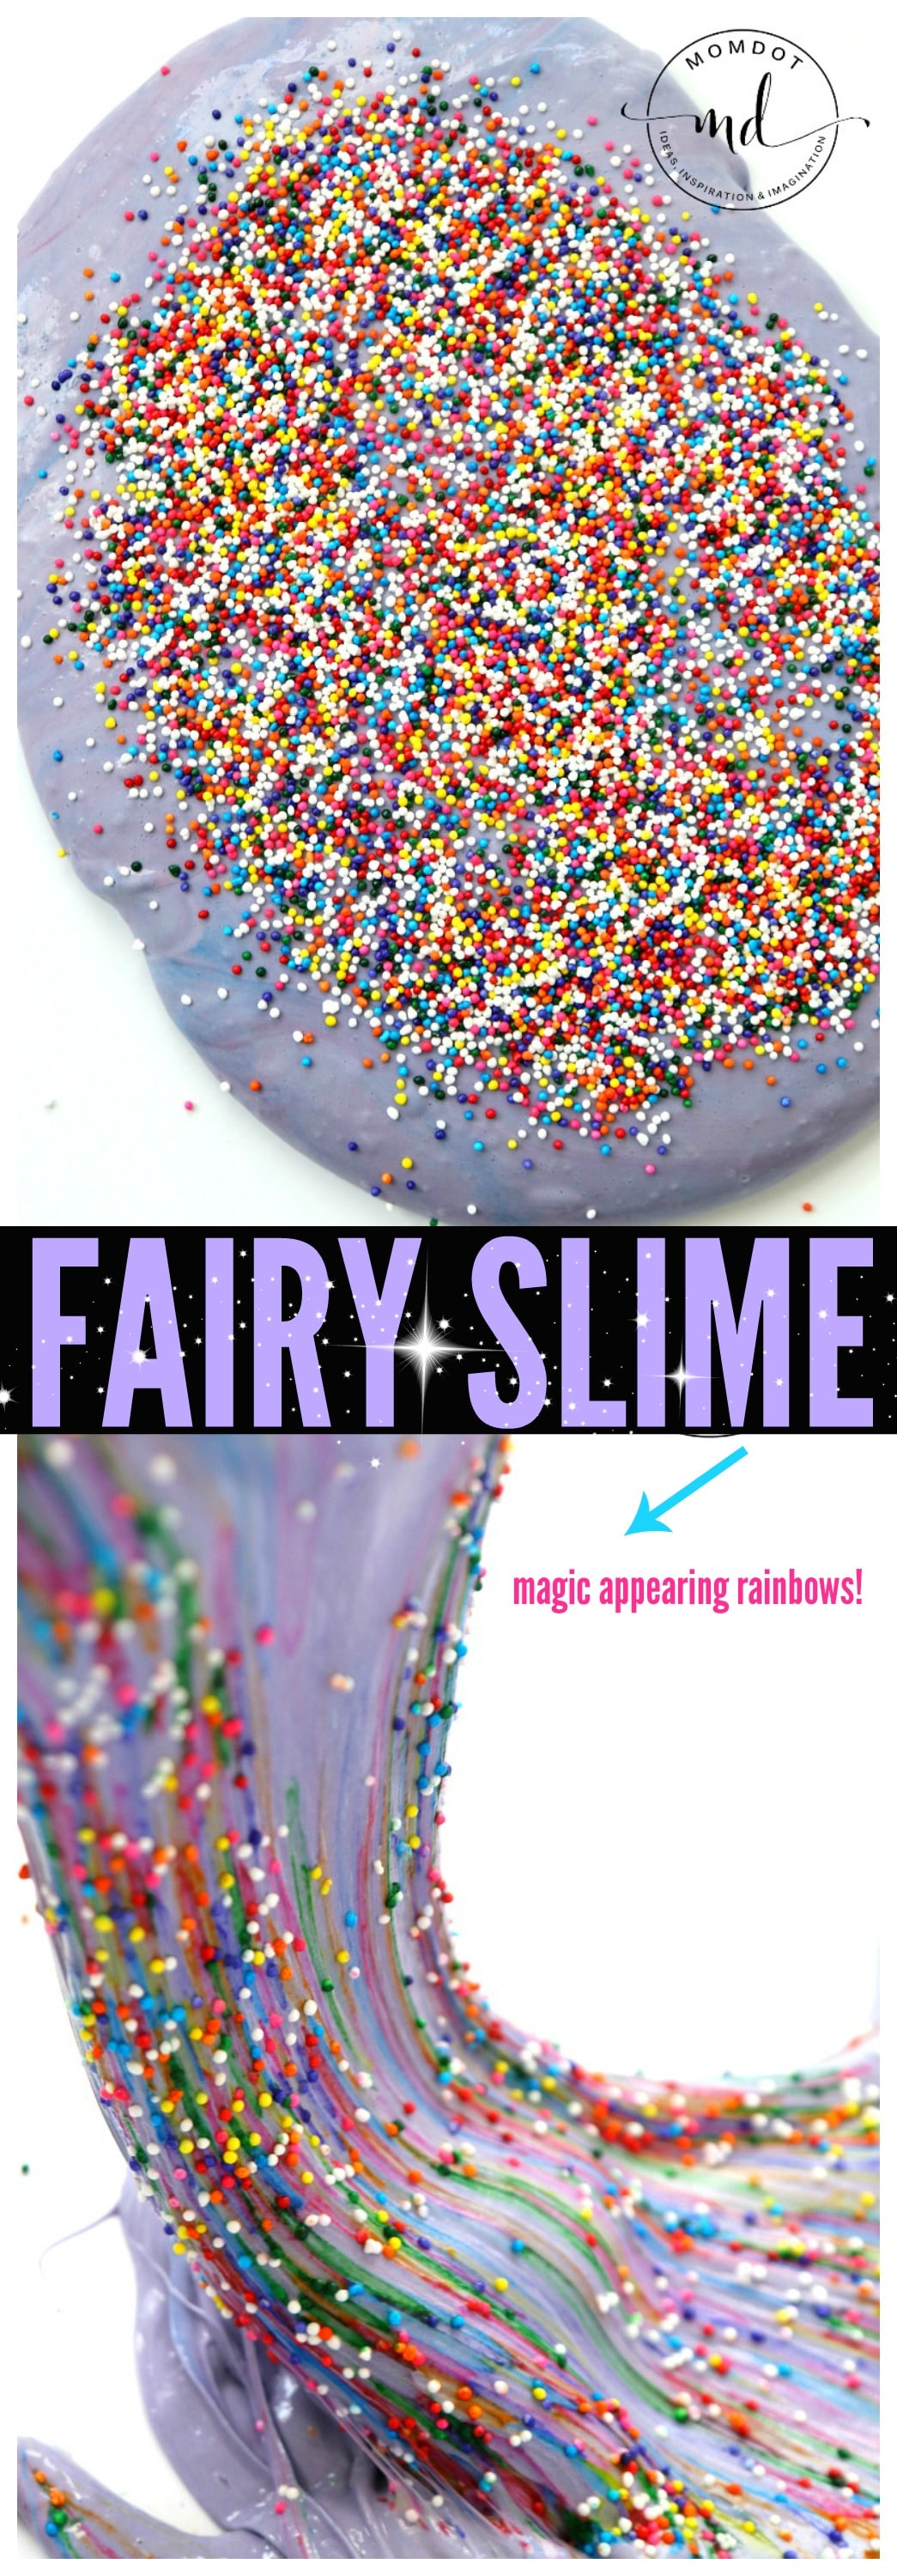 Fairy Slime: how to make fluffy fairy slime and magically appearing rainbows